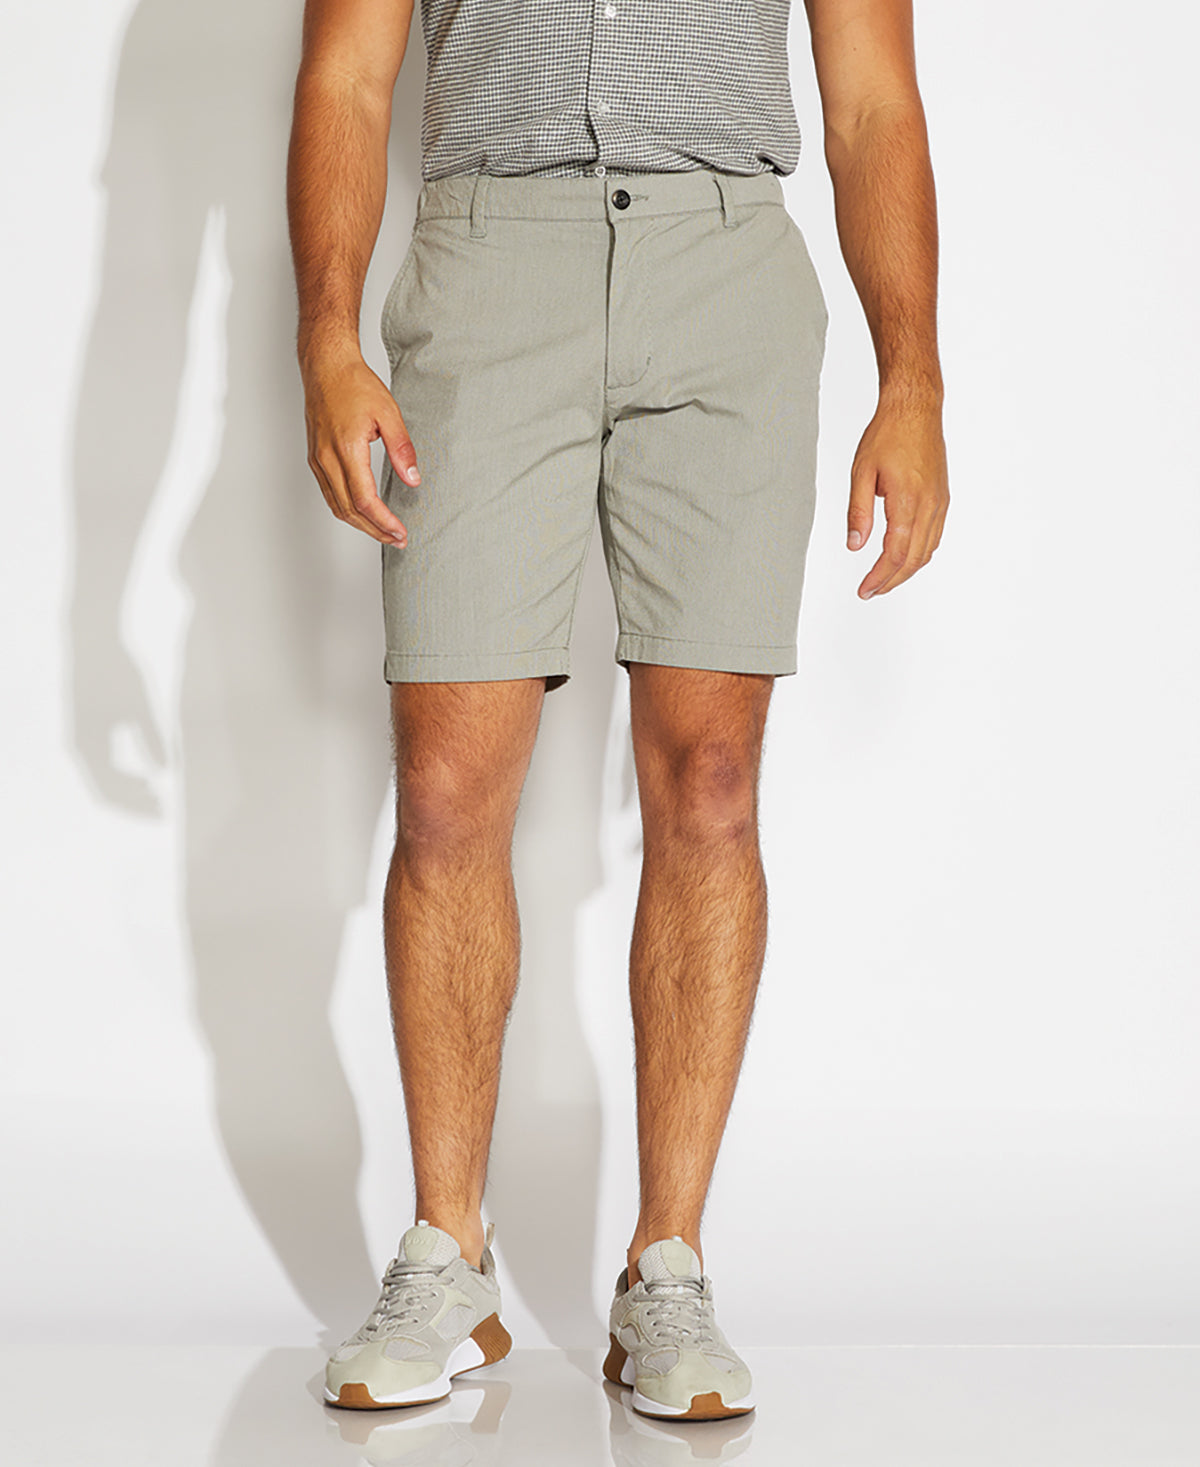 Men's Chino Shorts with 6 Inch Inseam